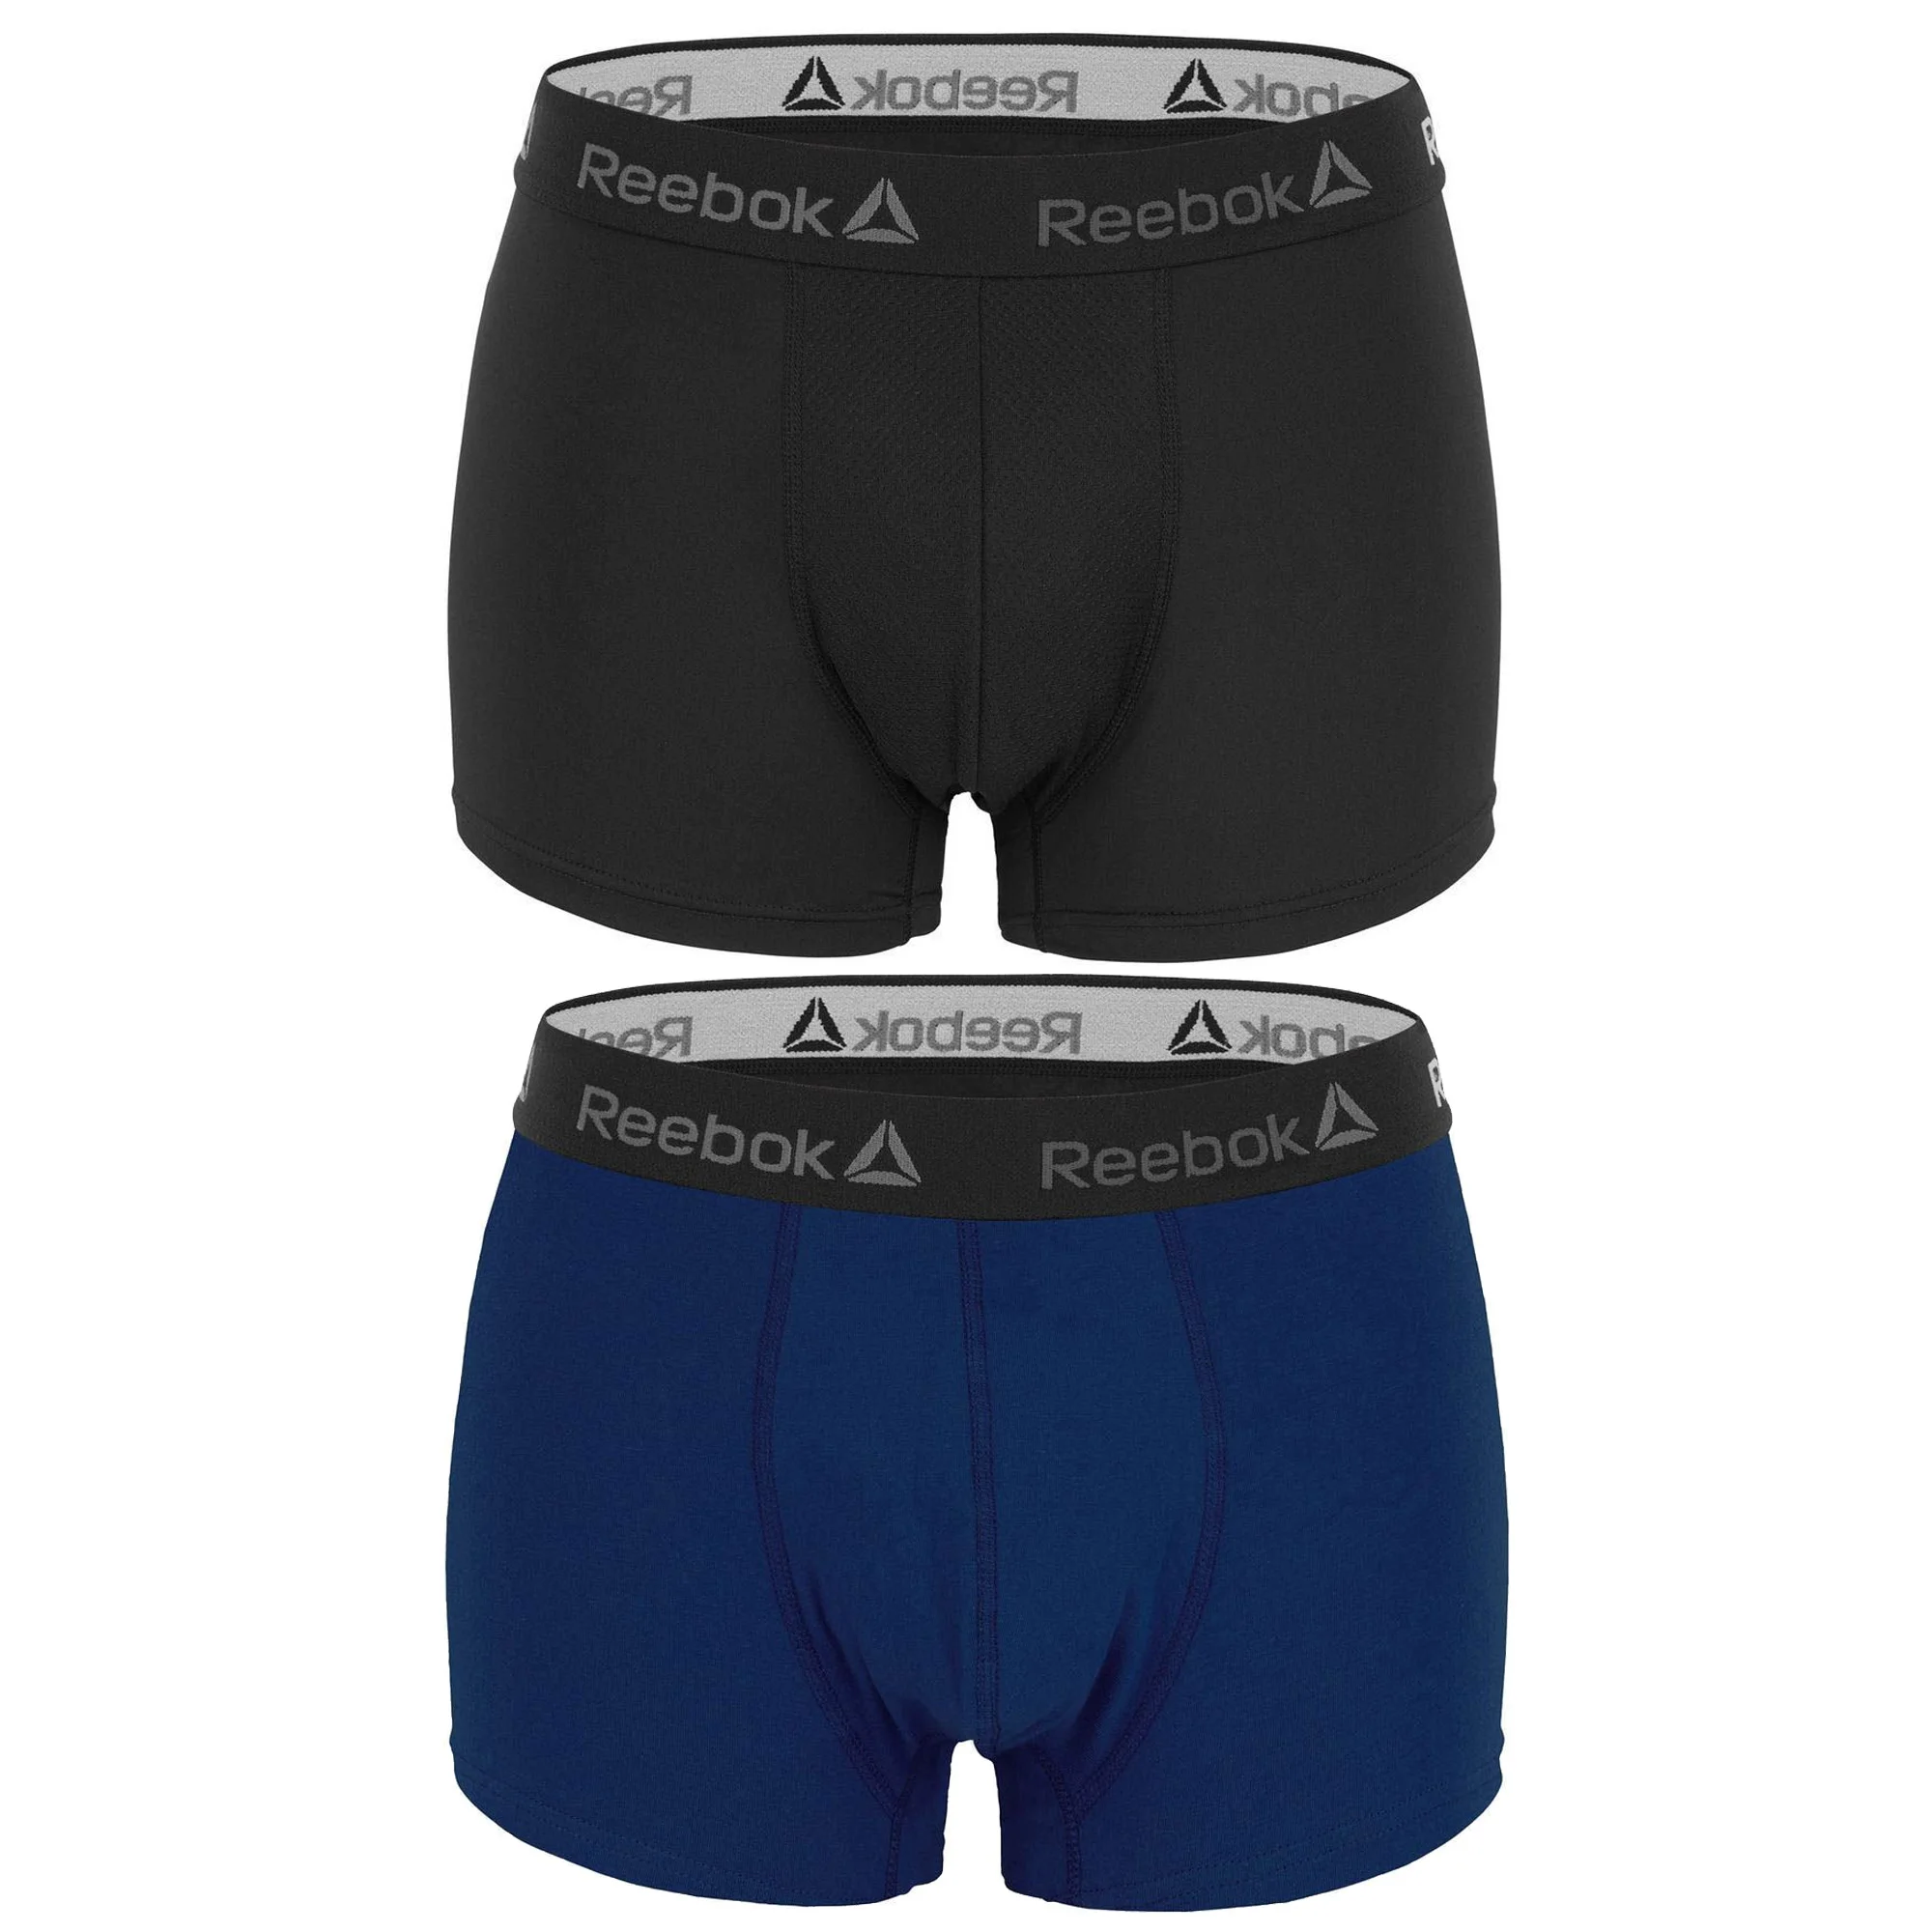 Reebok Type Briefs Boxer Pack 2 Pcs Various Combinations To Choose For ...